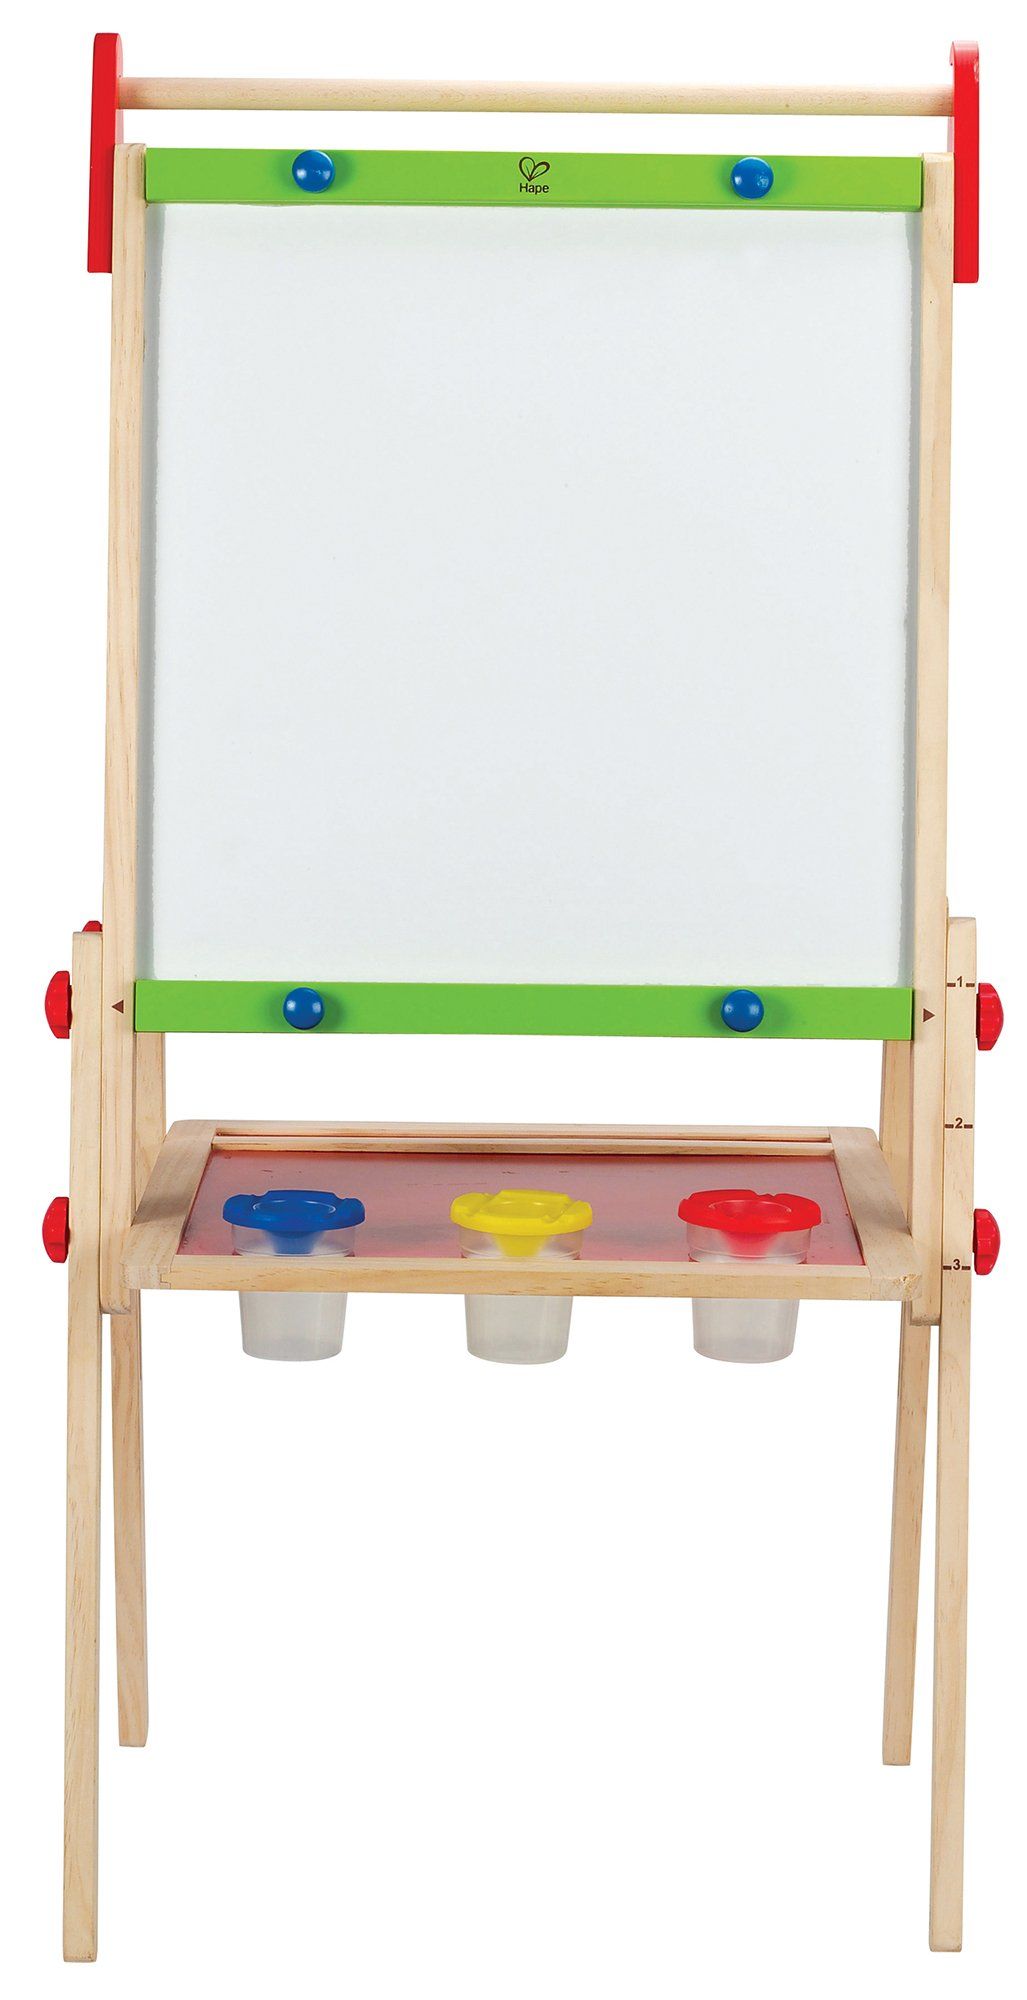 Award Winning Hape All-in-One Wooden Kid's Art Easel with Paper Roll and Accessories | Amazon (US)